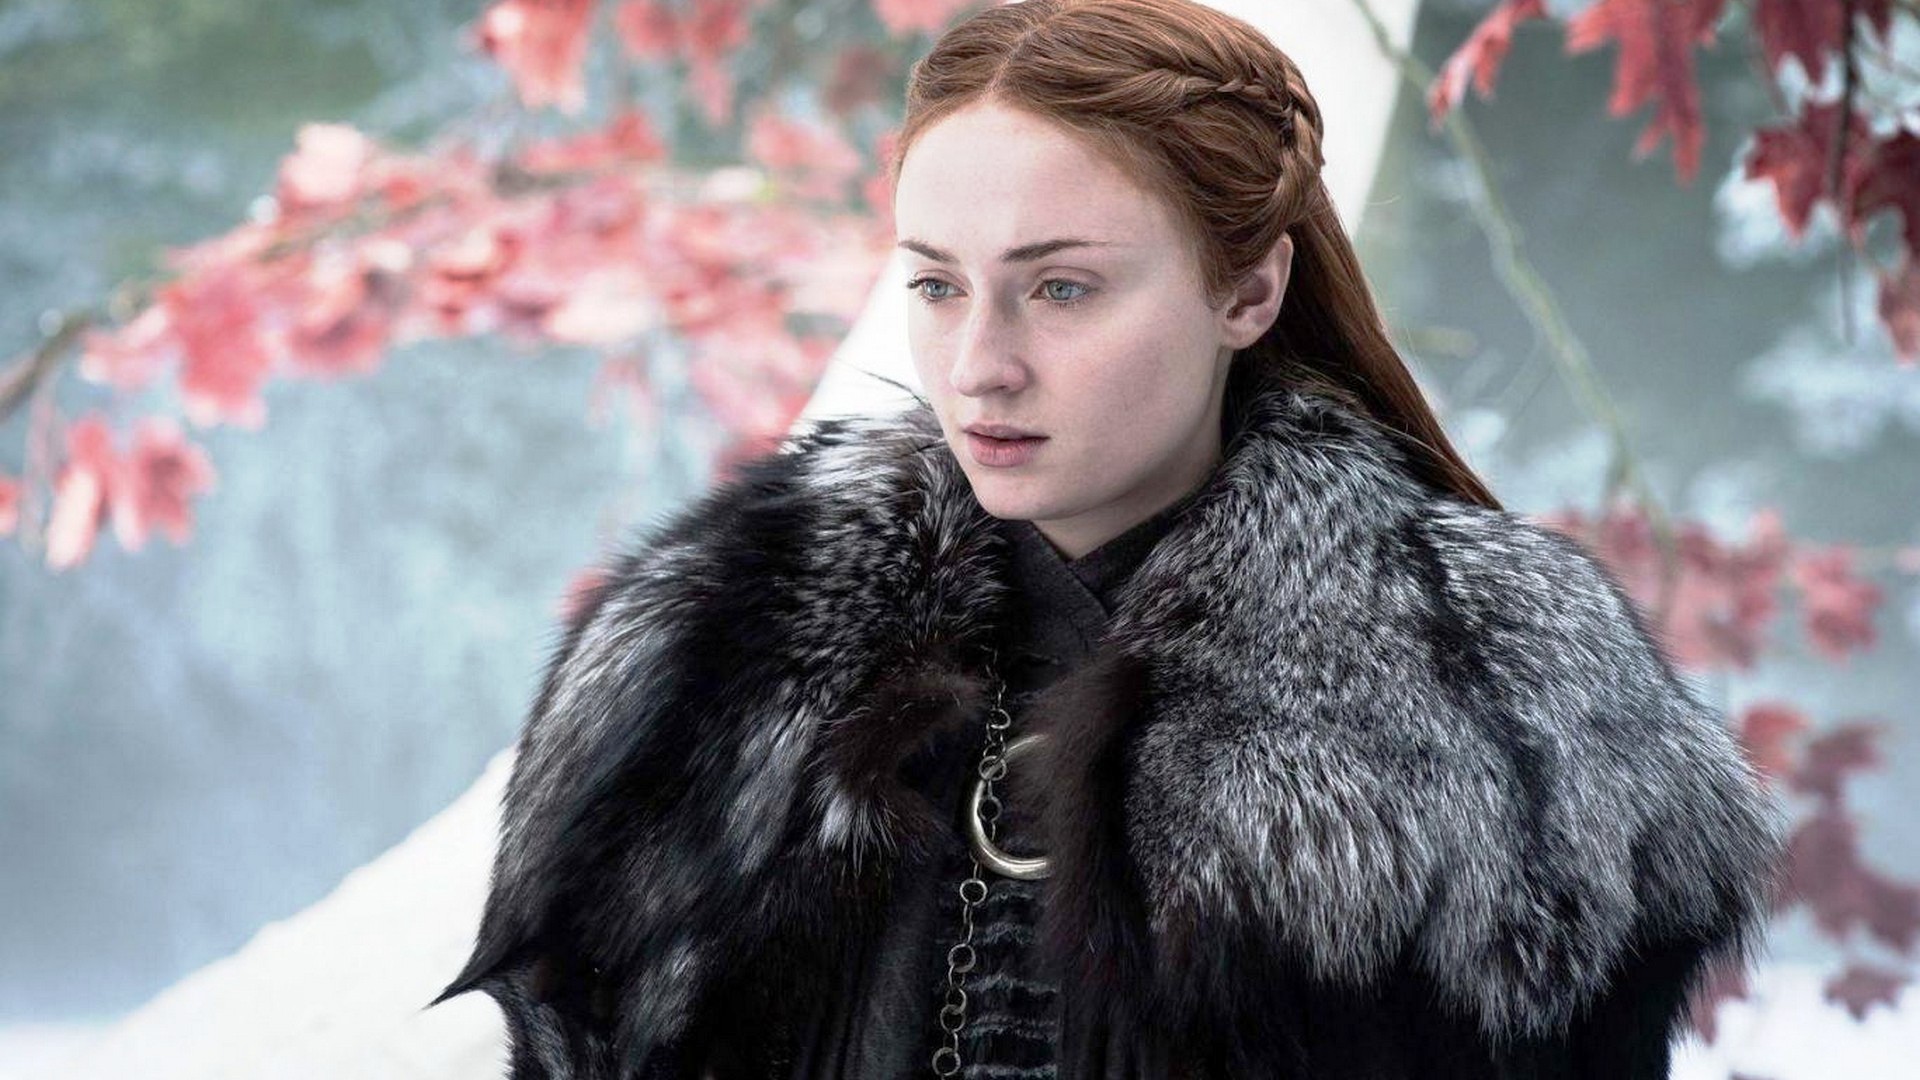 Game of Thrones Cast Sophie Turner as Sansa Stark Wallpaper with high-resolution 1920x1080 pixel. You can use this poster wallpaper for your Desktop Computers, Mac Screensavers, Windows Backgrounds, iPhone Wallpapers, Tablet or Android Lock screen and another Mobile device